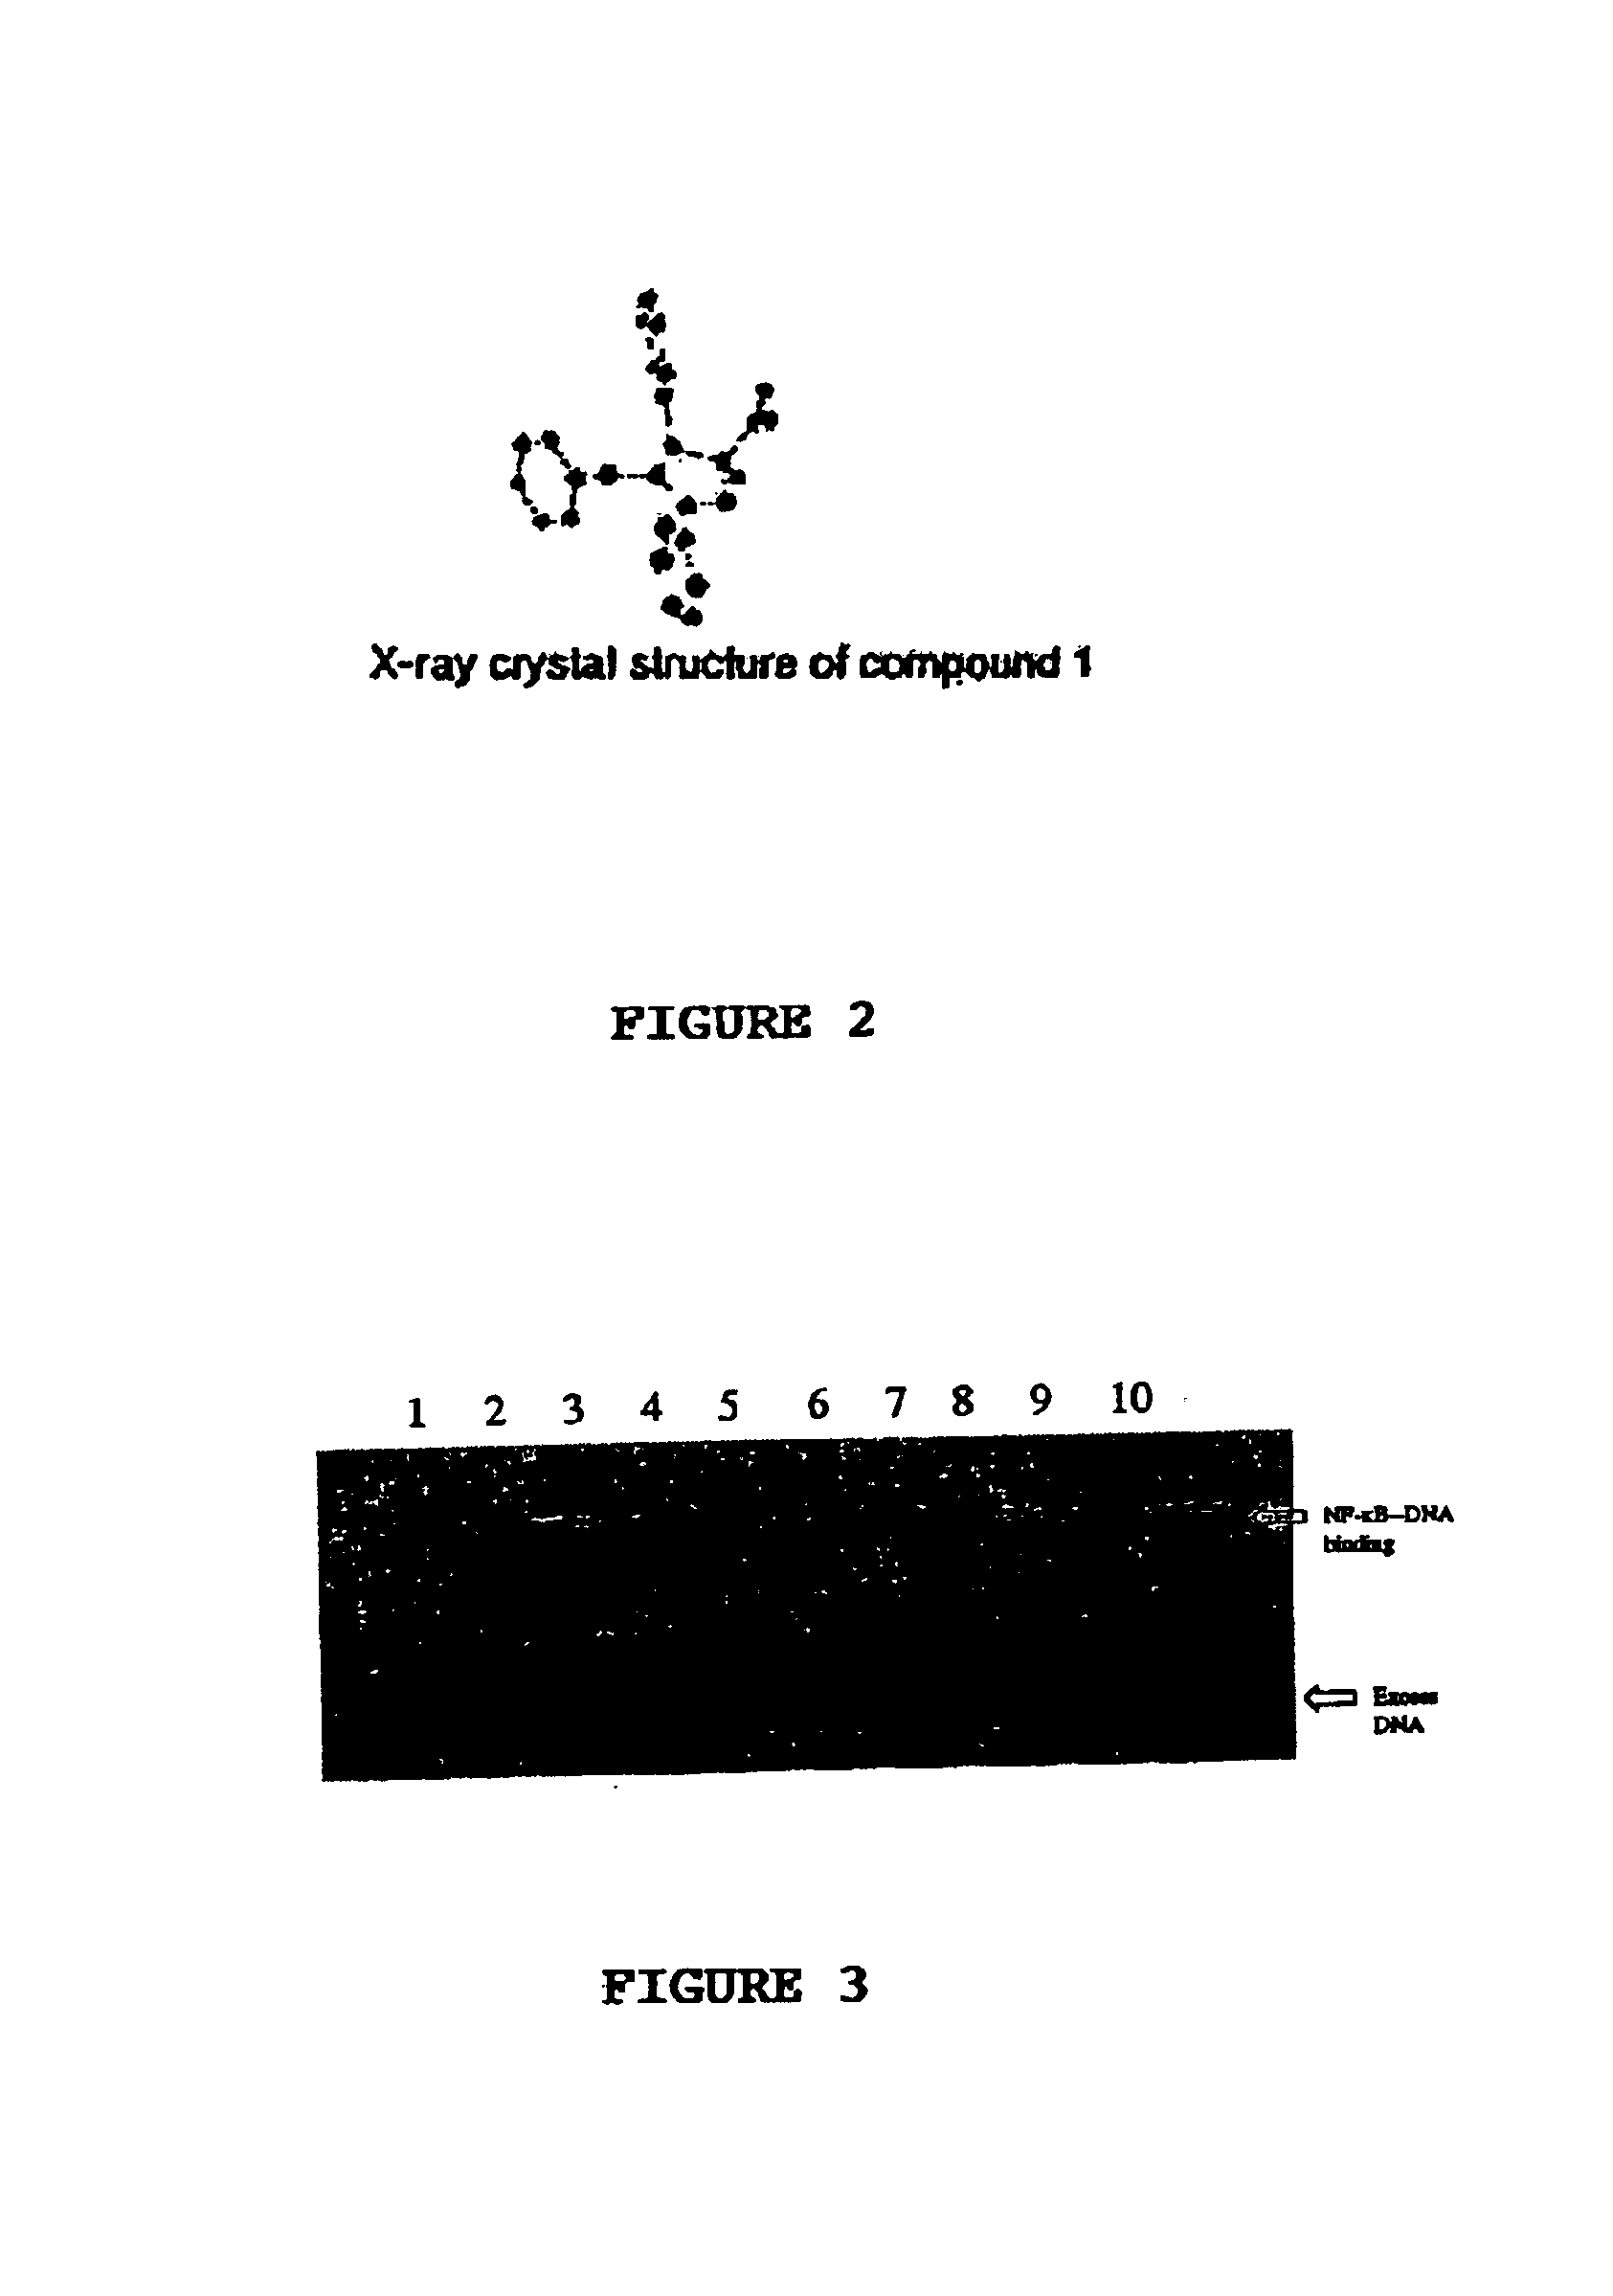 Multi-substituted imidazolines and method of use thereof